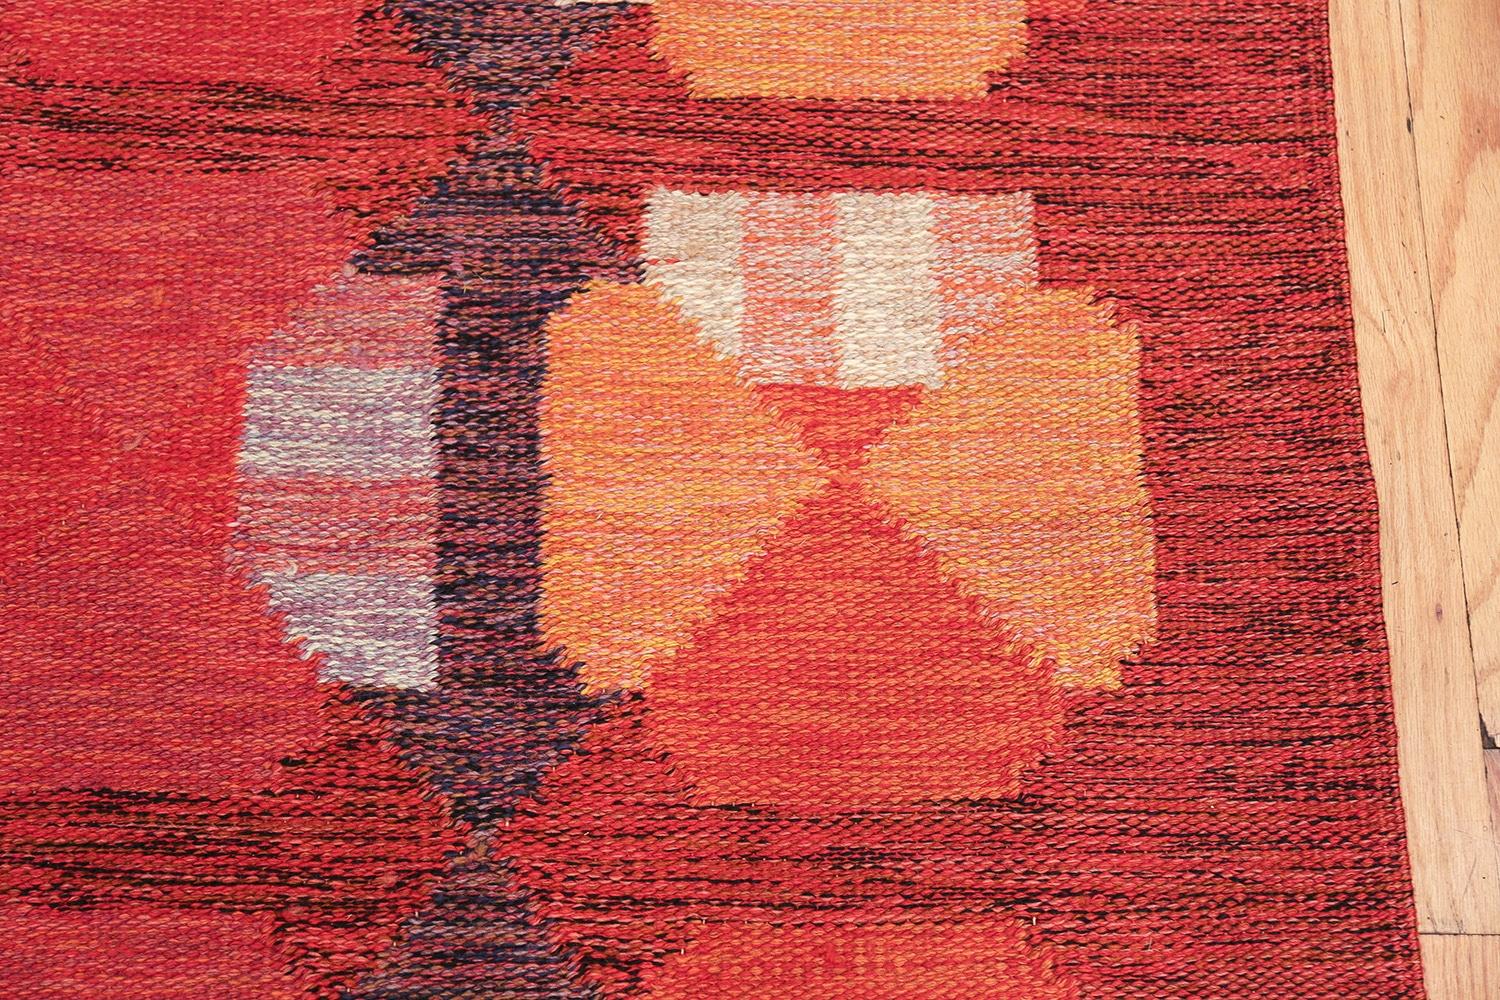 Vintage carpet by Alestalon Mottokutomo, Finland, mid-20th century. Size: 5 ft 4 in x 7 ft 9 in (1.63 m x 2.36 m). 